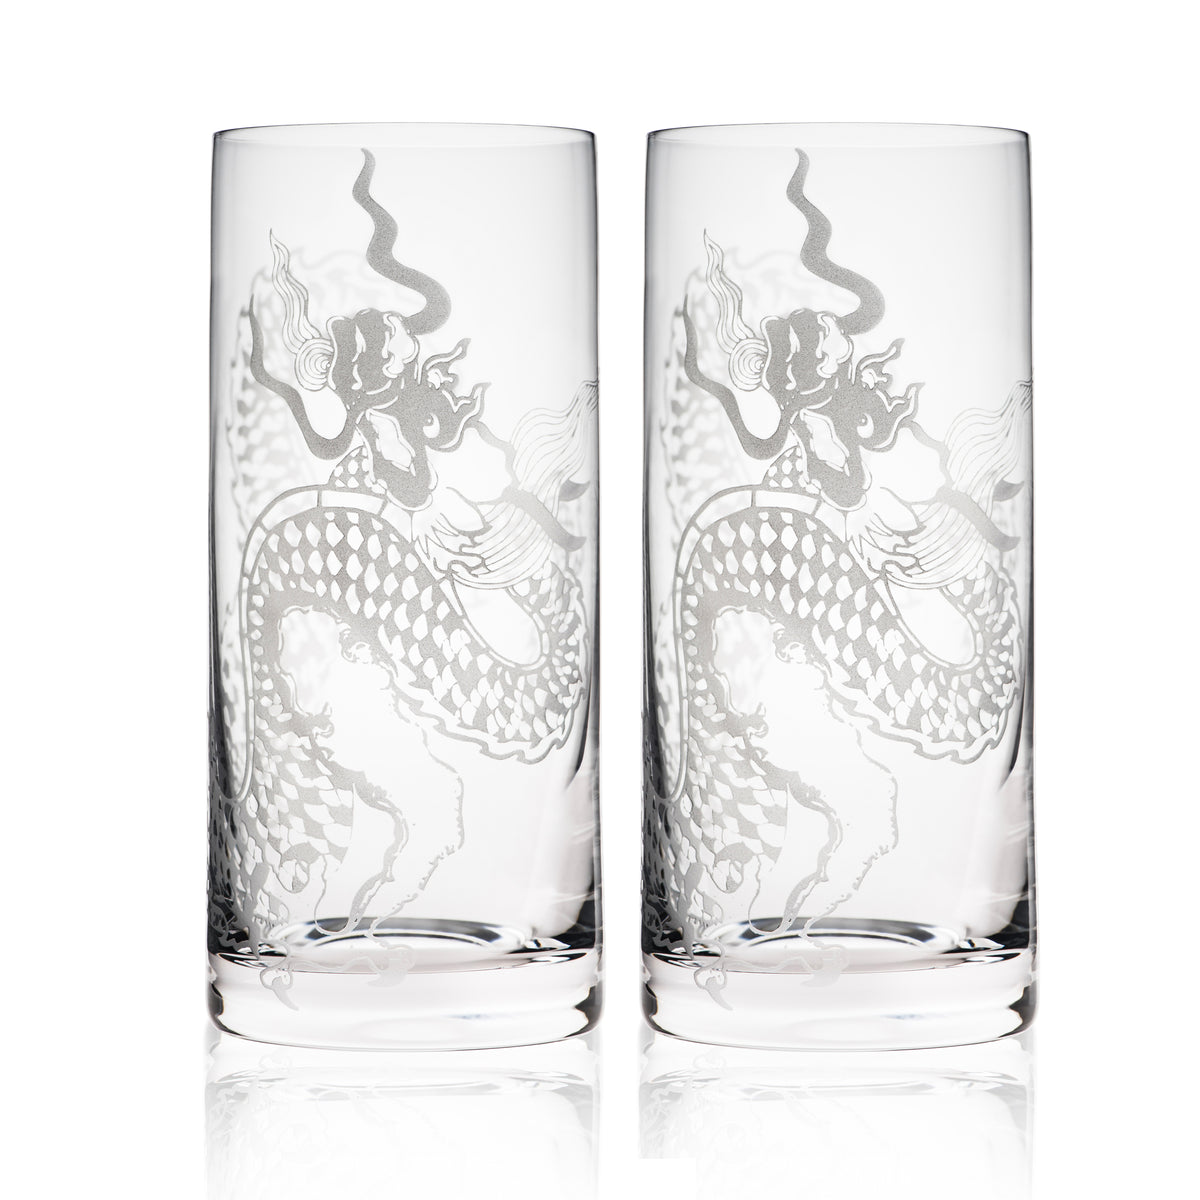 Dragon Highball Glasses Set of 2 hand-etched crystal from Caskata